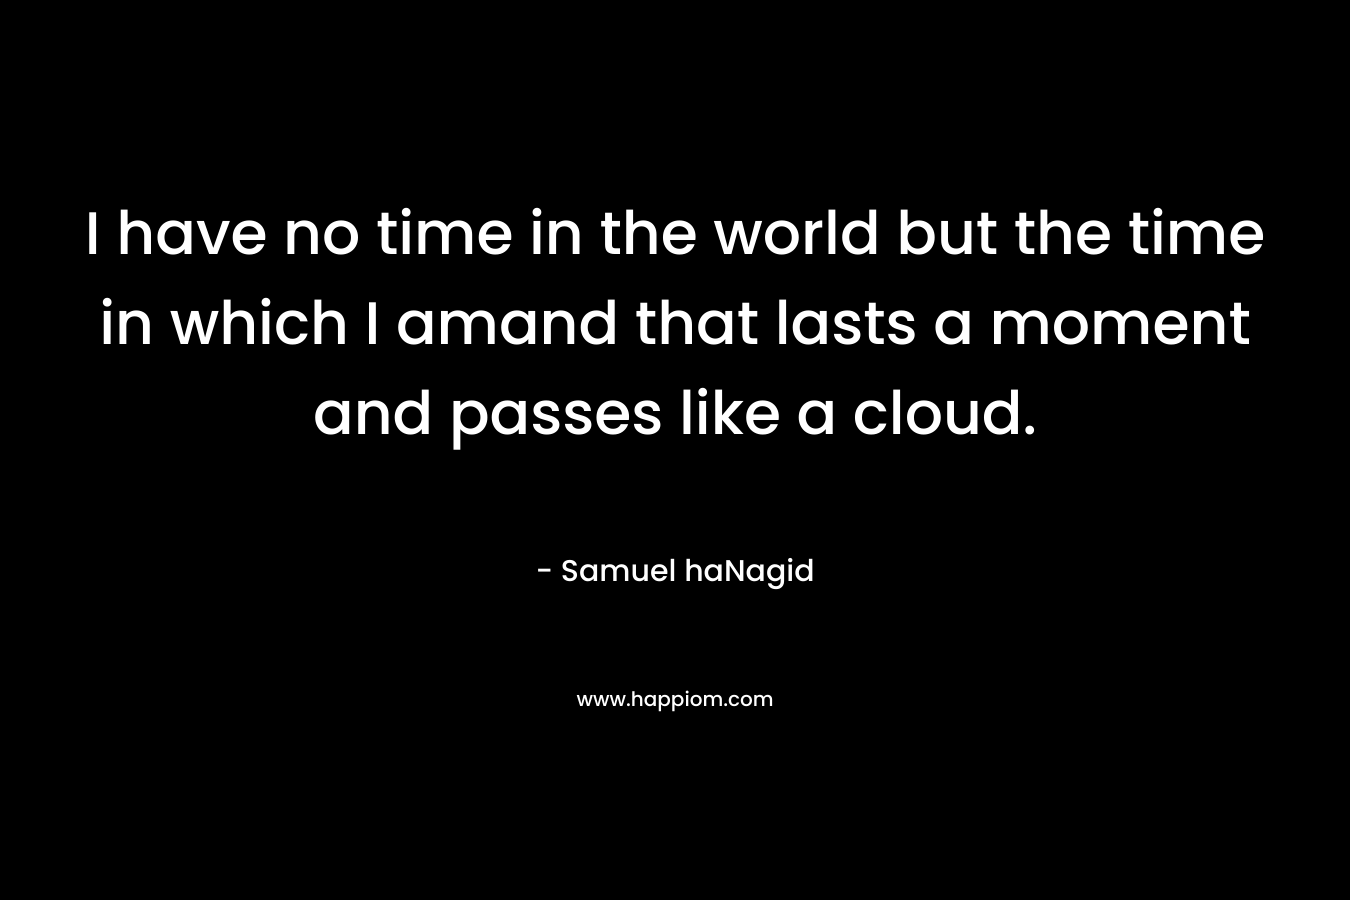 I have no time in the world but the time in which I amand that lasts a moment and passes like a cloud. – Samuel haNagid